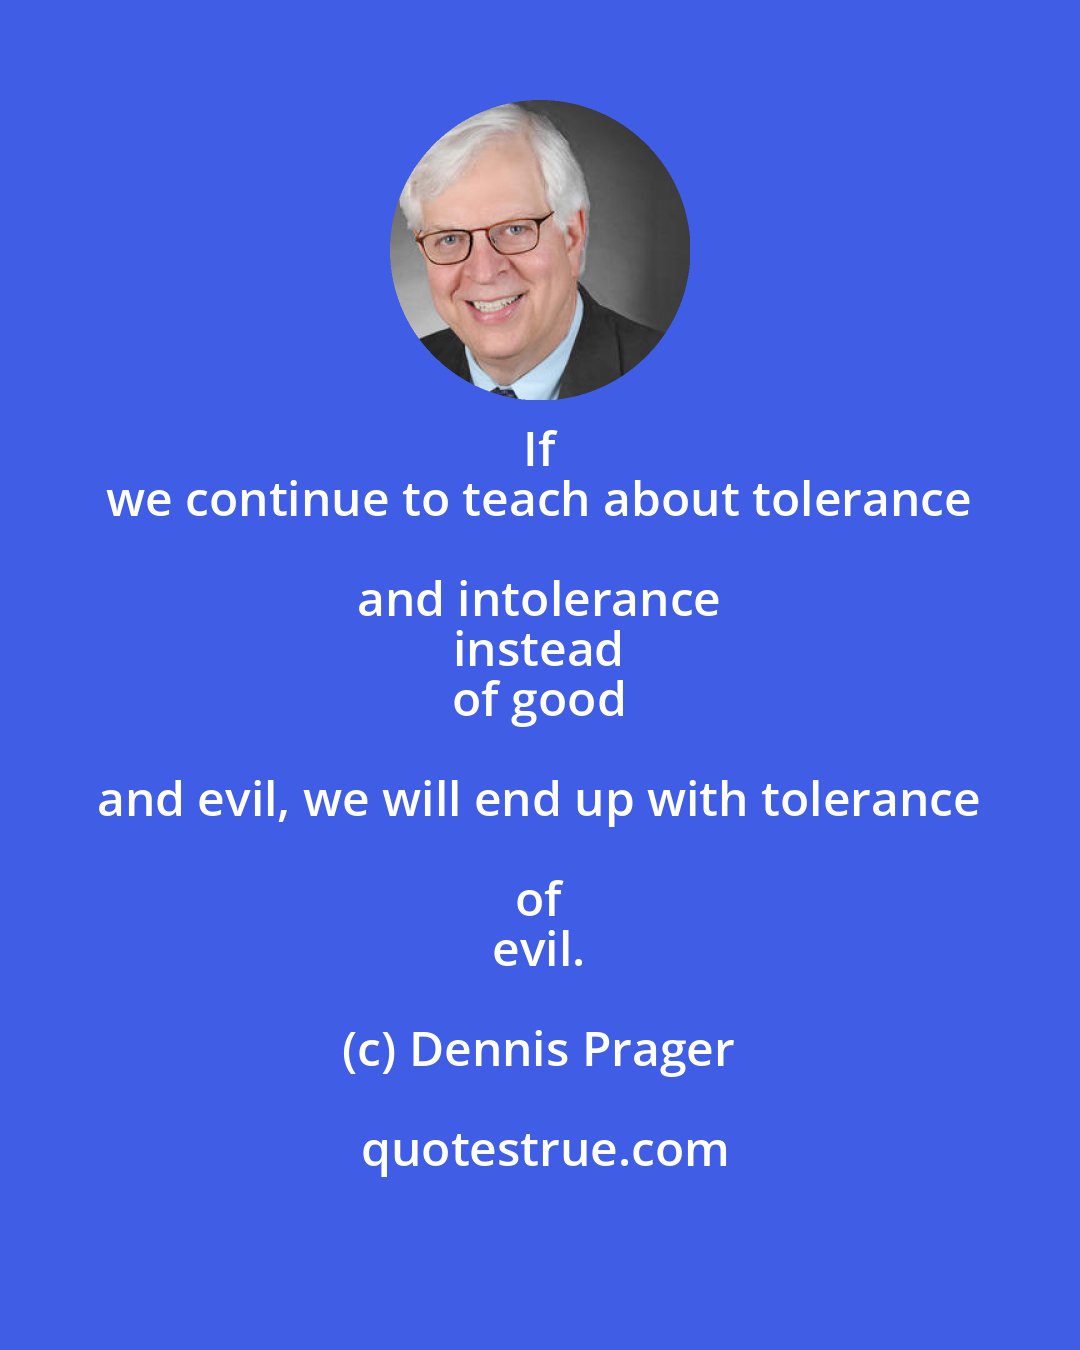 Dennis Prager: If 
 we continue to teach about tolerance and intolerance 
 instead 
 of good and evil, we will end up with tolerance of 
 evil.